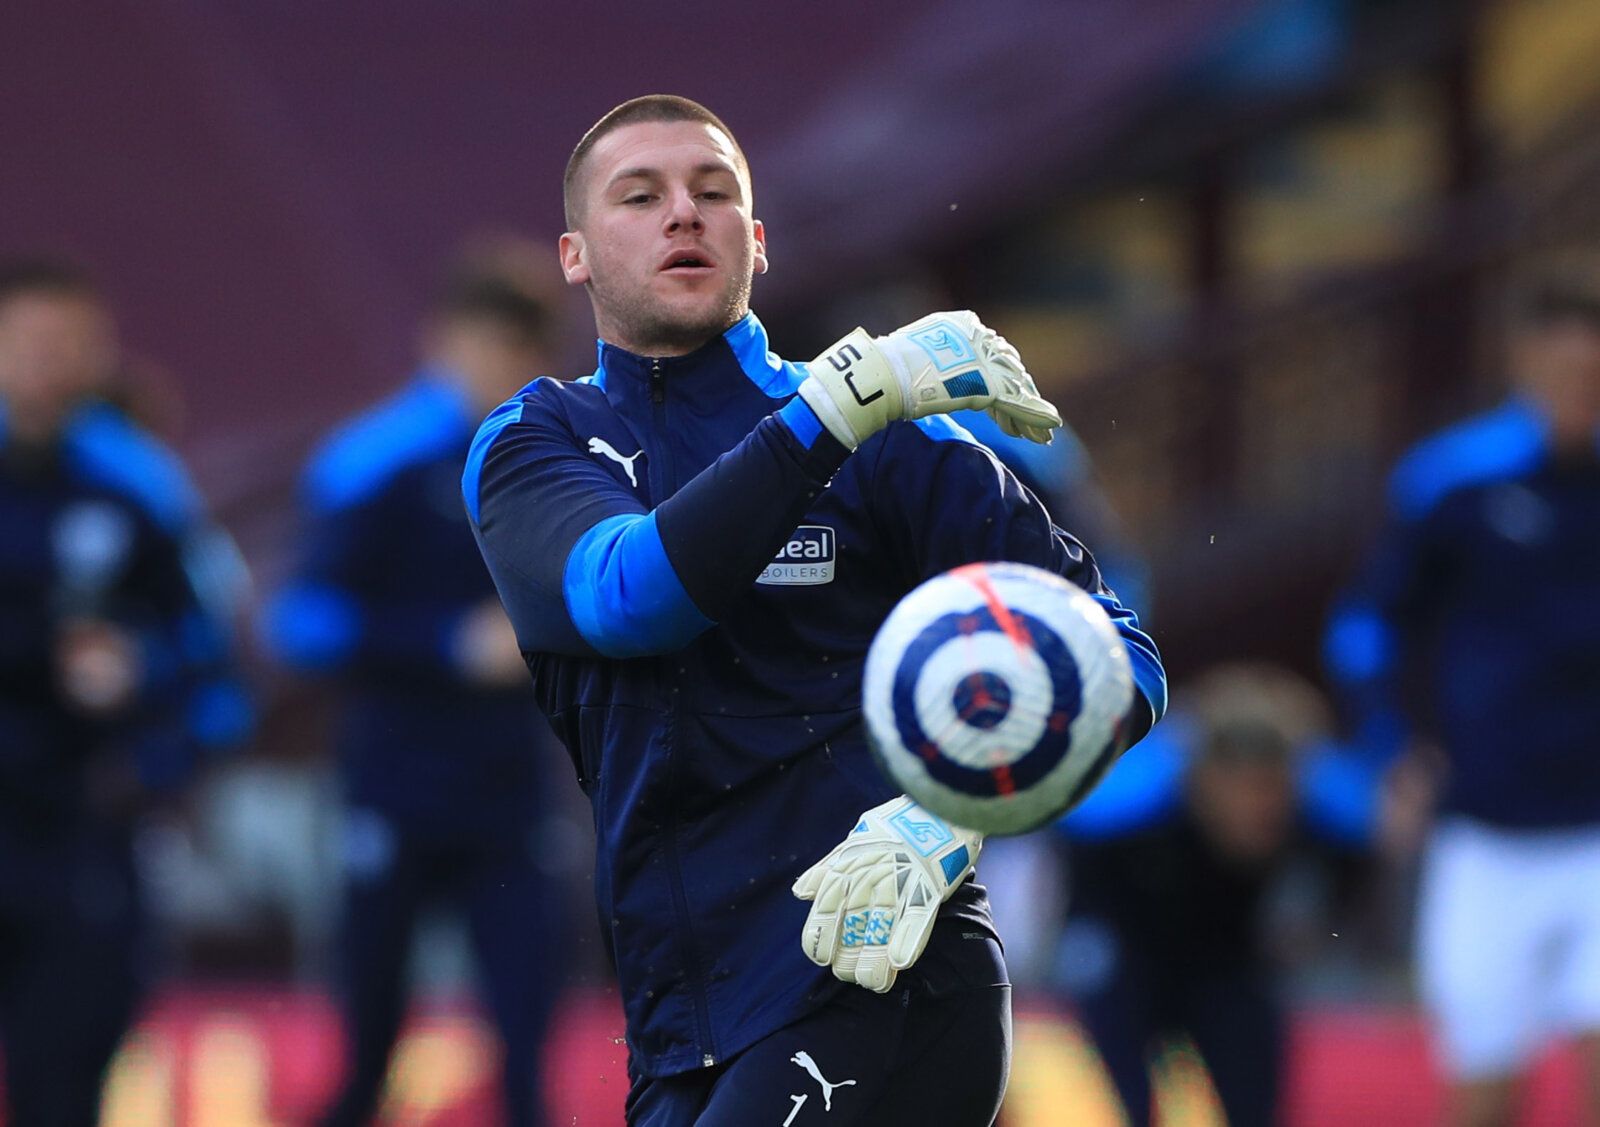 Soccer Football - Premier League - Aston Villa v West Bromwich Albion  - Villa Park, Birmingham, Britain - April 25, 2021 West Bromwich Albion's Sam Johnstone during the warm up before the match Pool via REUTERS/Mike Egerton EDITORIAL USE ONLY. No use with unauthorized audio, video, data, fixture lists, club/league logos or 'live' services. Online in-match use limited to 75 images, no video emulation. No use in betting, games or single club /league/player publications.  Please contact your accou